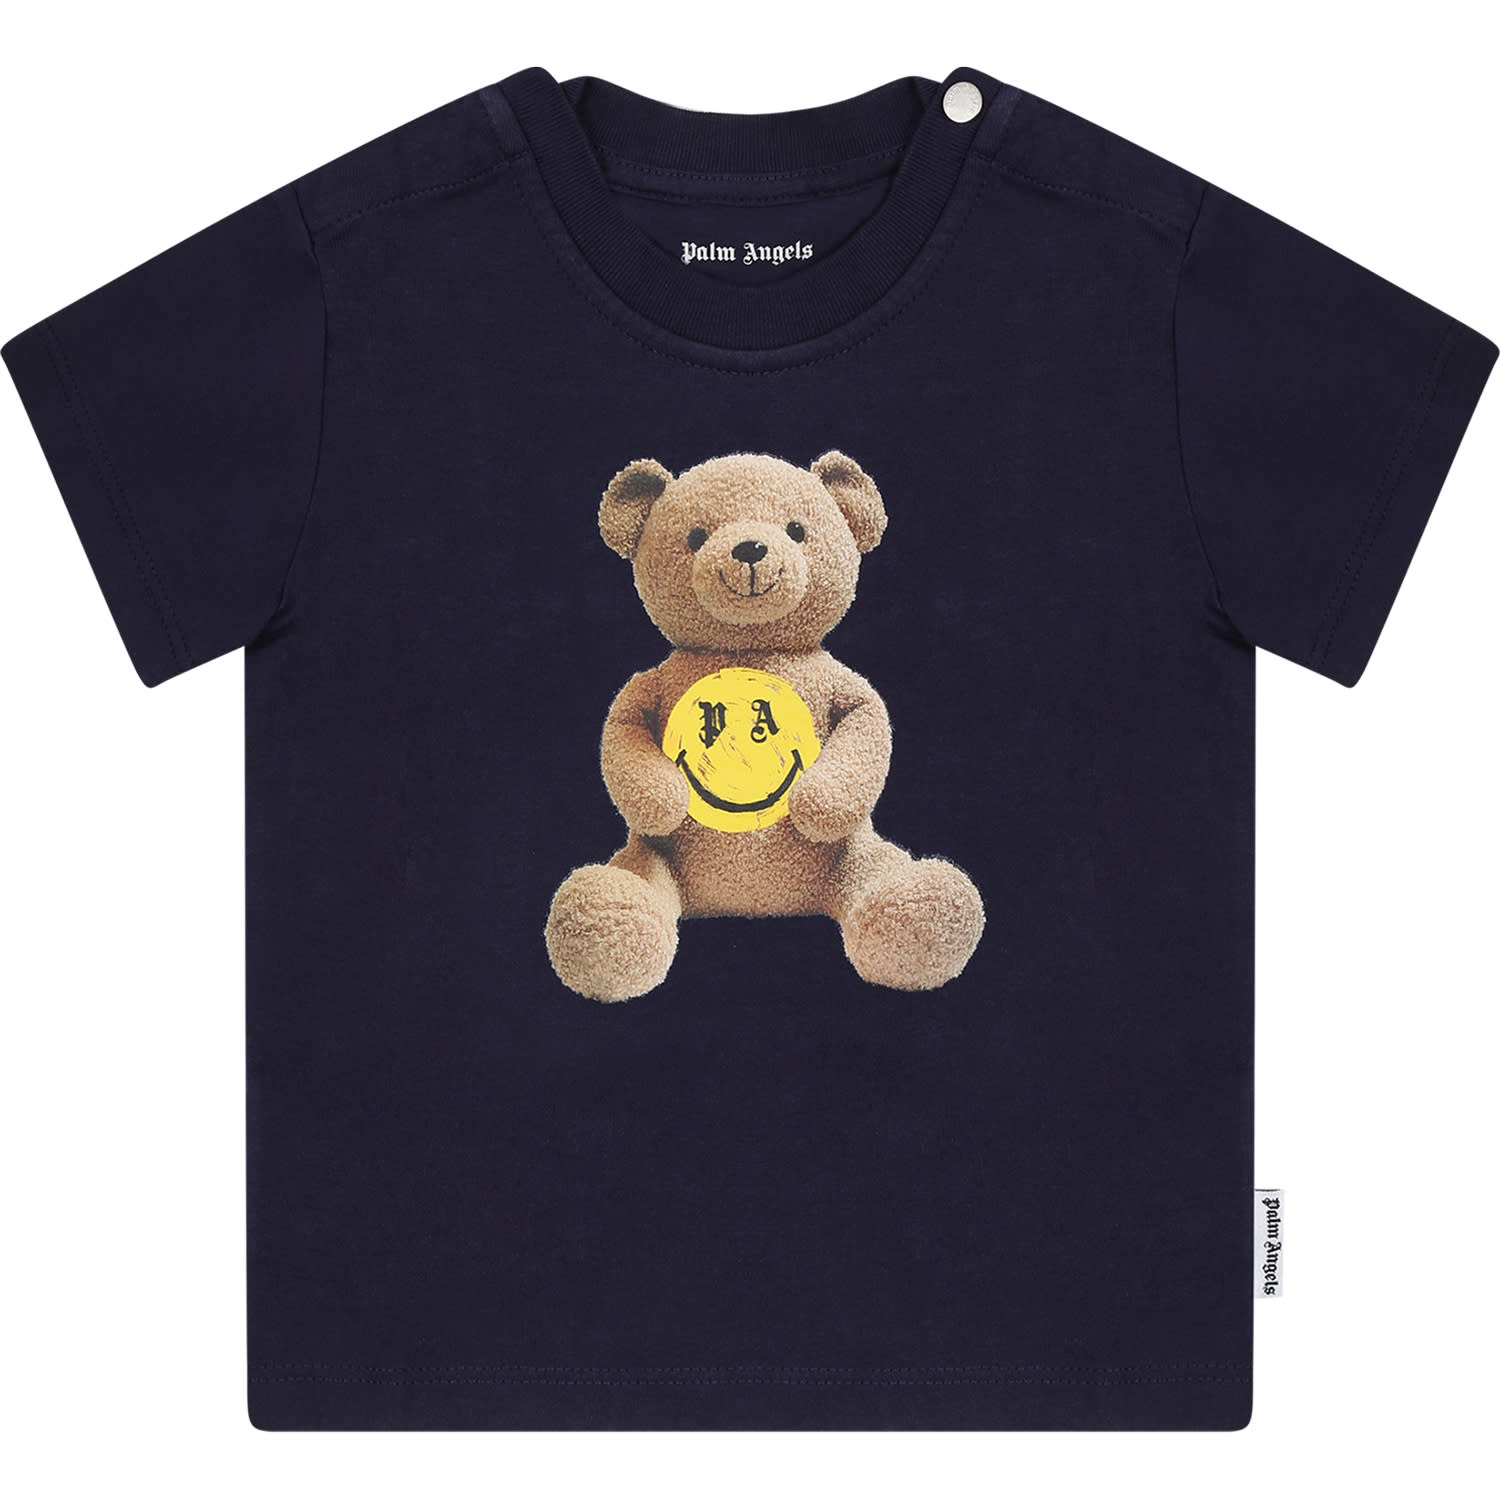 PALM ANGELS BLUE T-SHIRT FOR BABYKIDS WITH BEAR